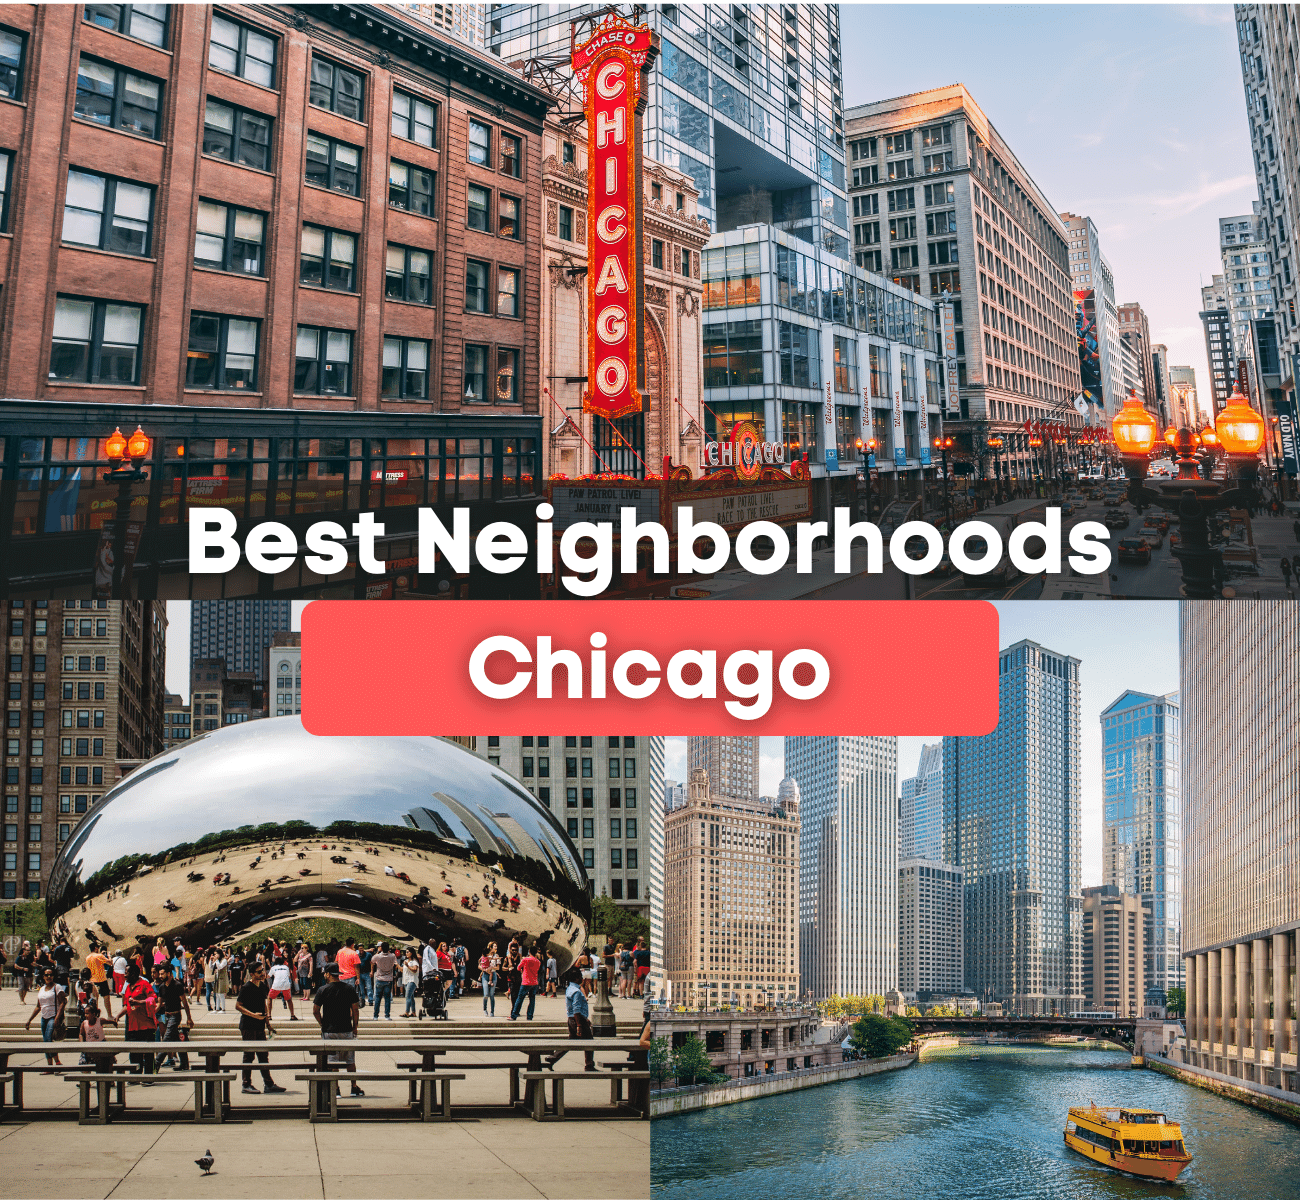 Best places to live in Chicago - What are the best neighborhoods in Chicago?